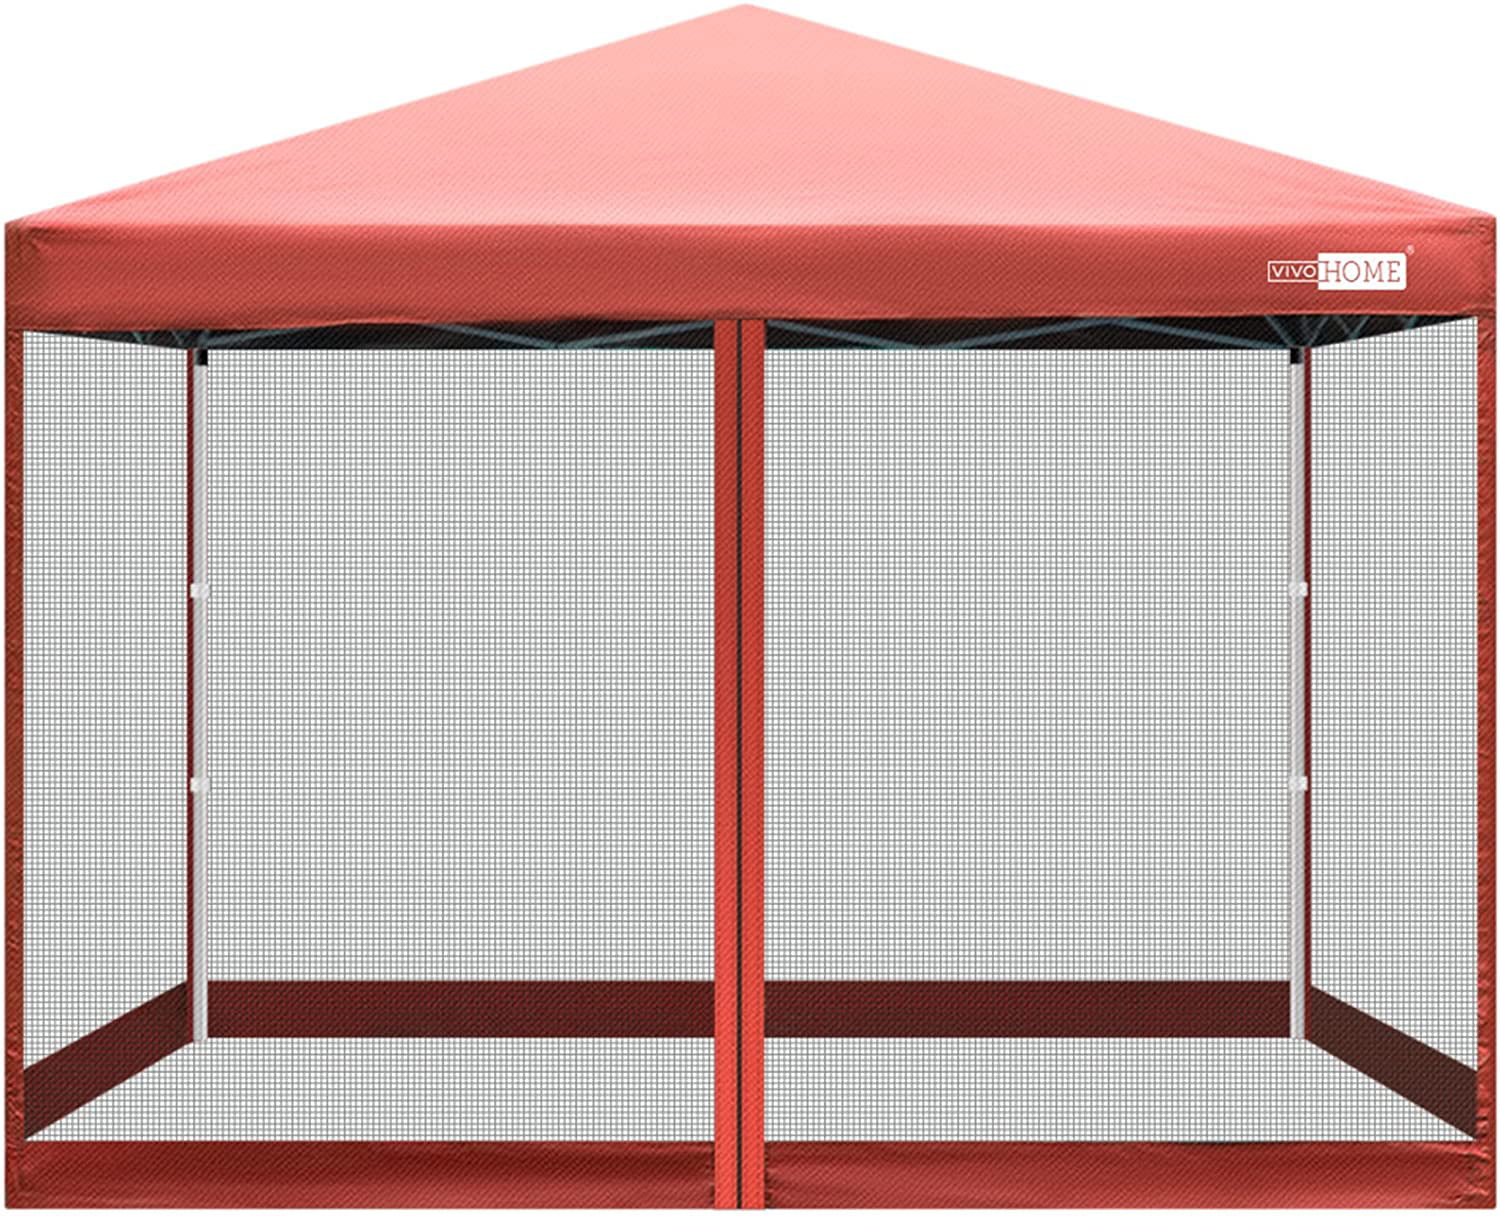 VIVOHOME 210D Oxford Outdoor Easy Pop Up Canopy Screen Party Tent with Mesh Side Walls (8 x 8 FT, Red)